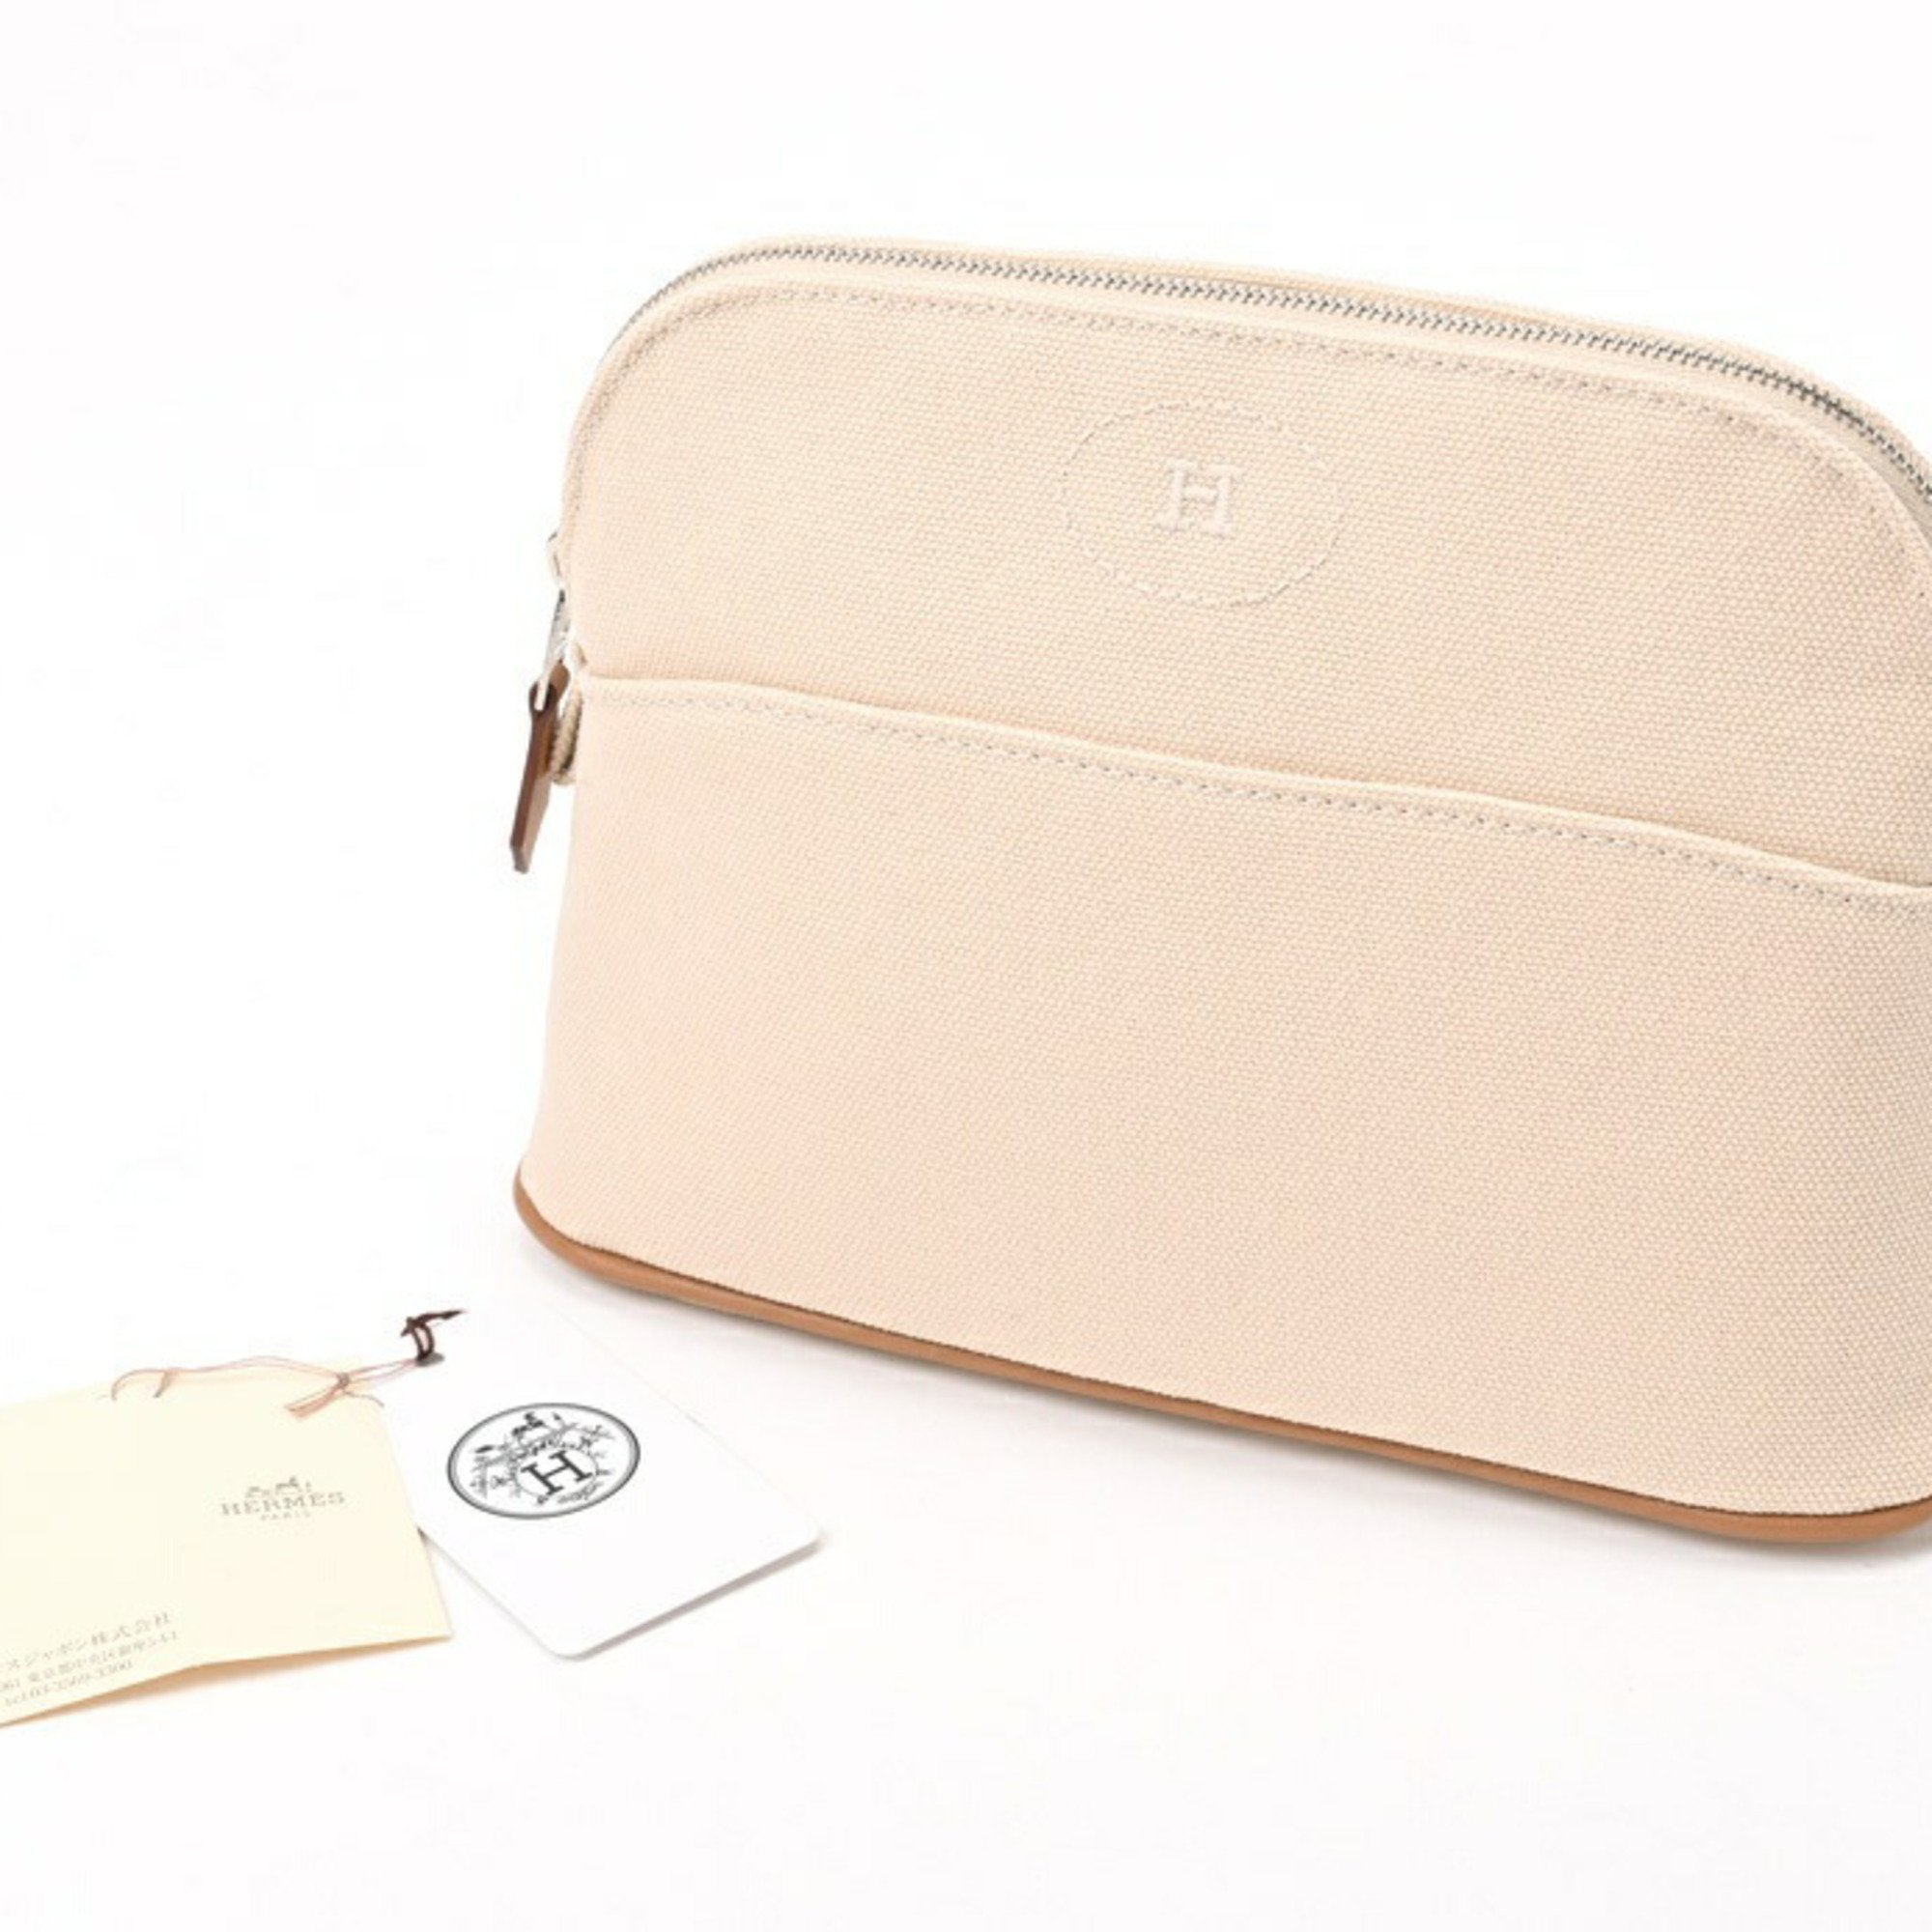 Hermes HERMES Bolide Pouch PM 20 Canvas Leather Beige S-155731